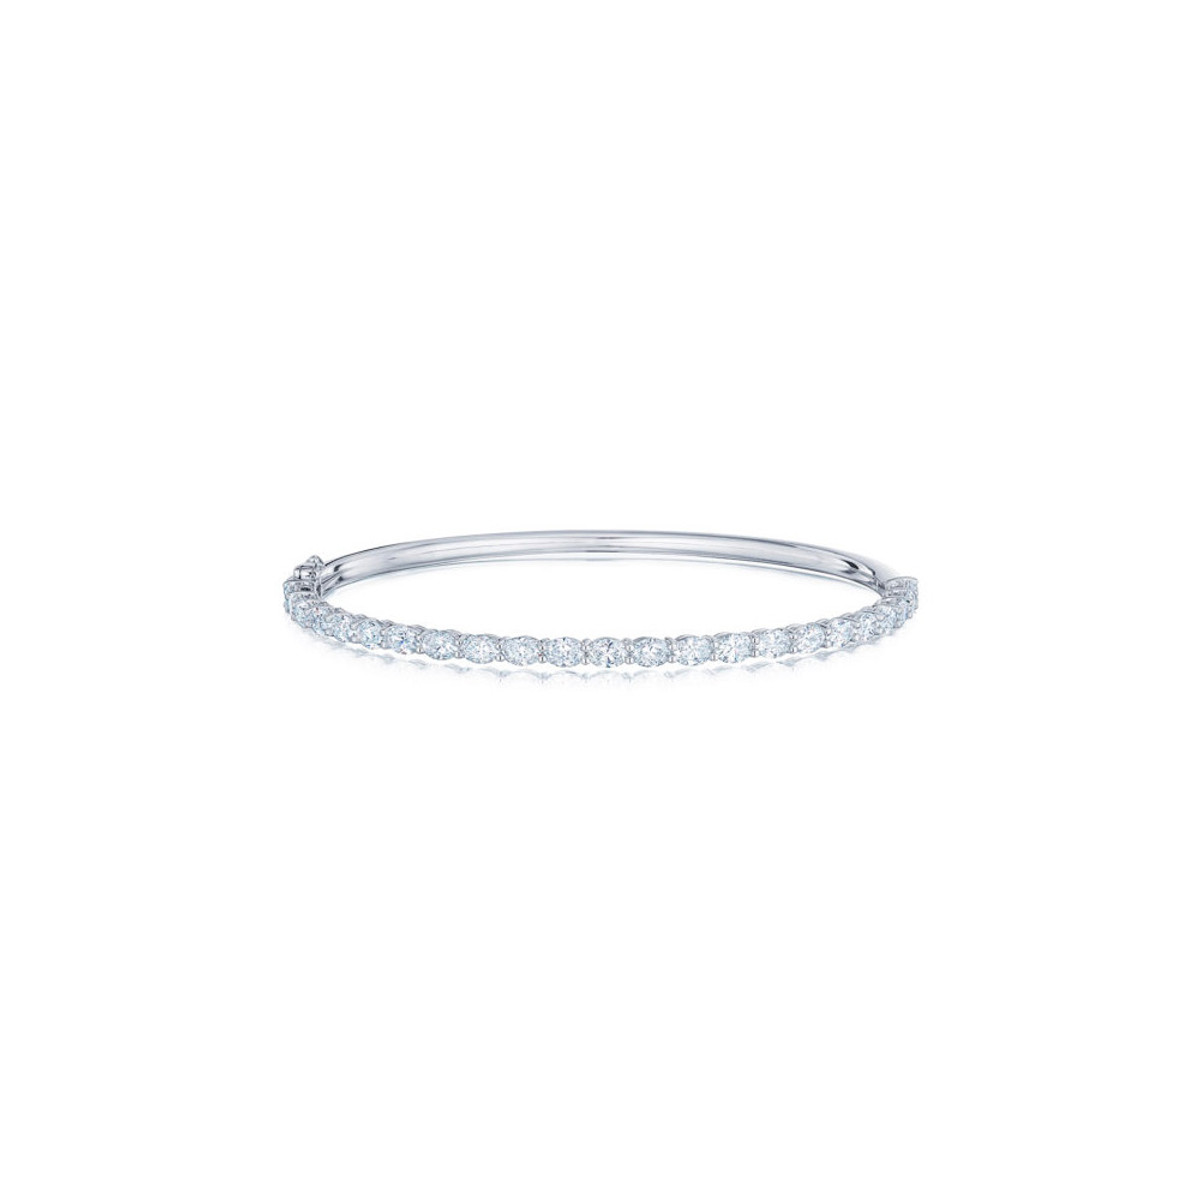 Kwiat 18K White Gold Stackable Oval Diamond Bangle-DIBR6602 Product Image